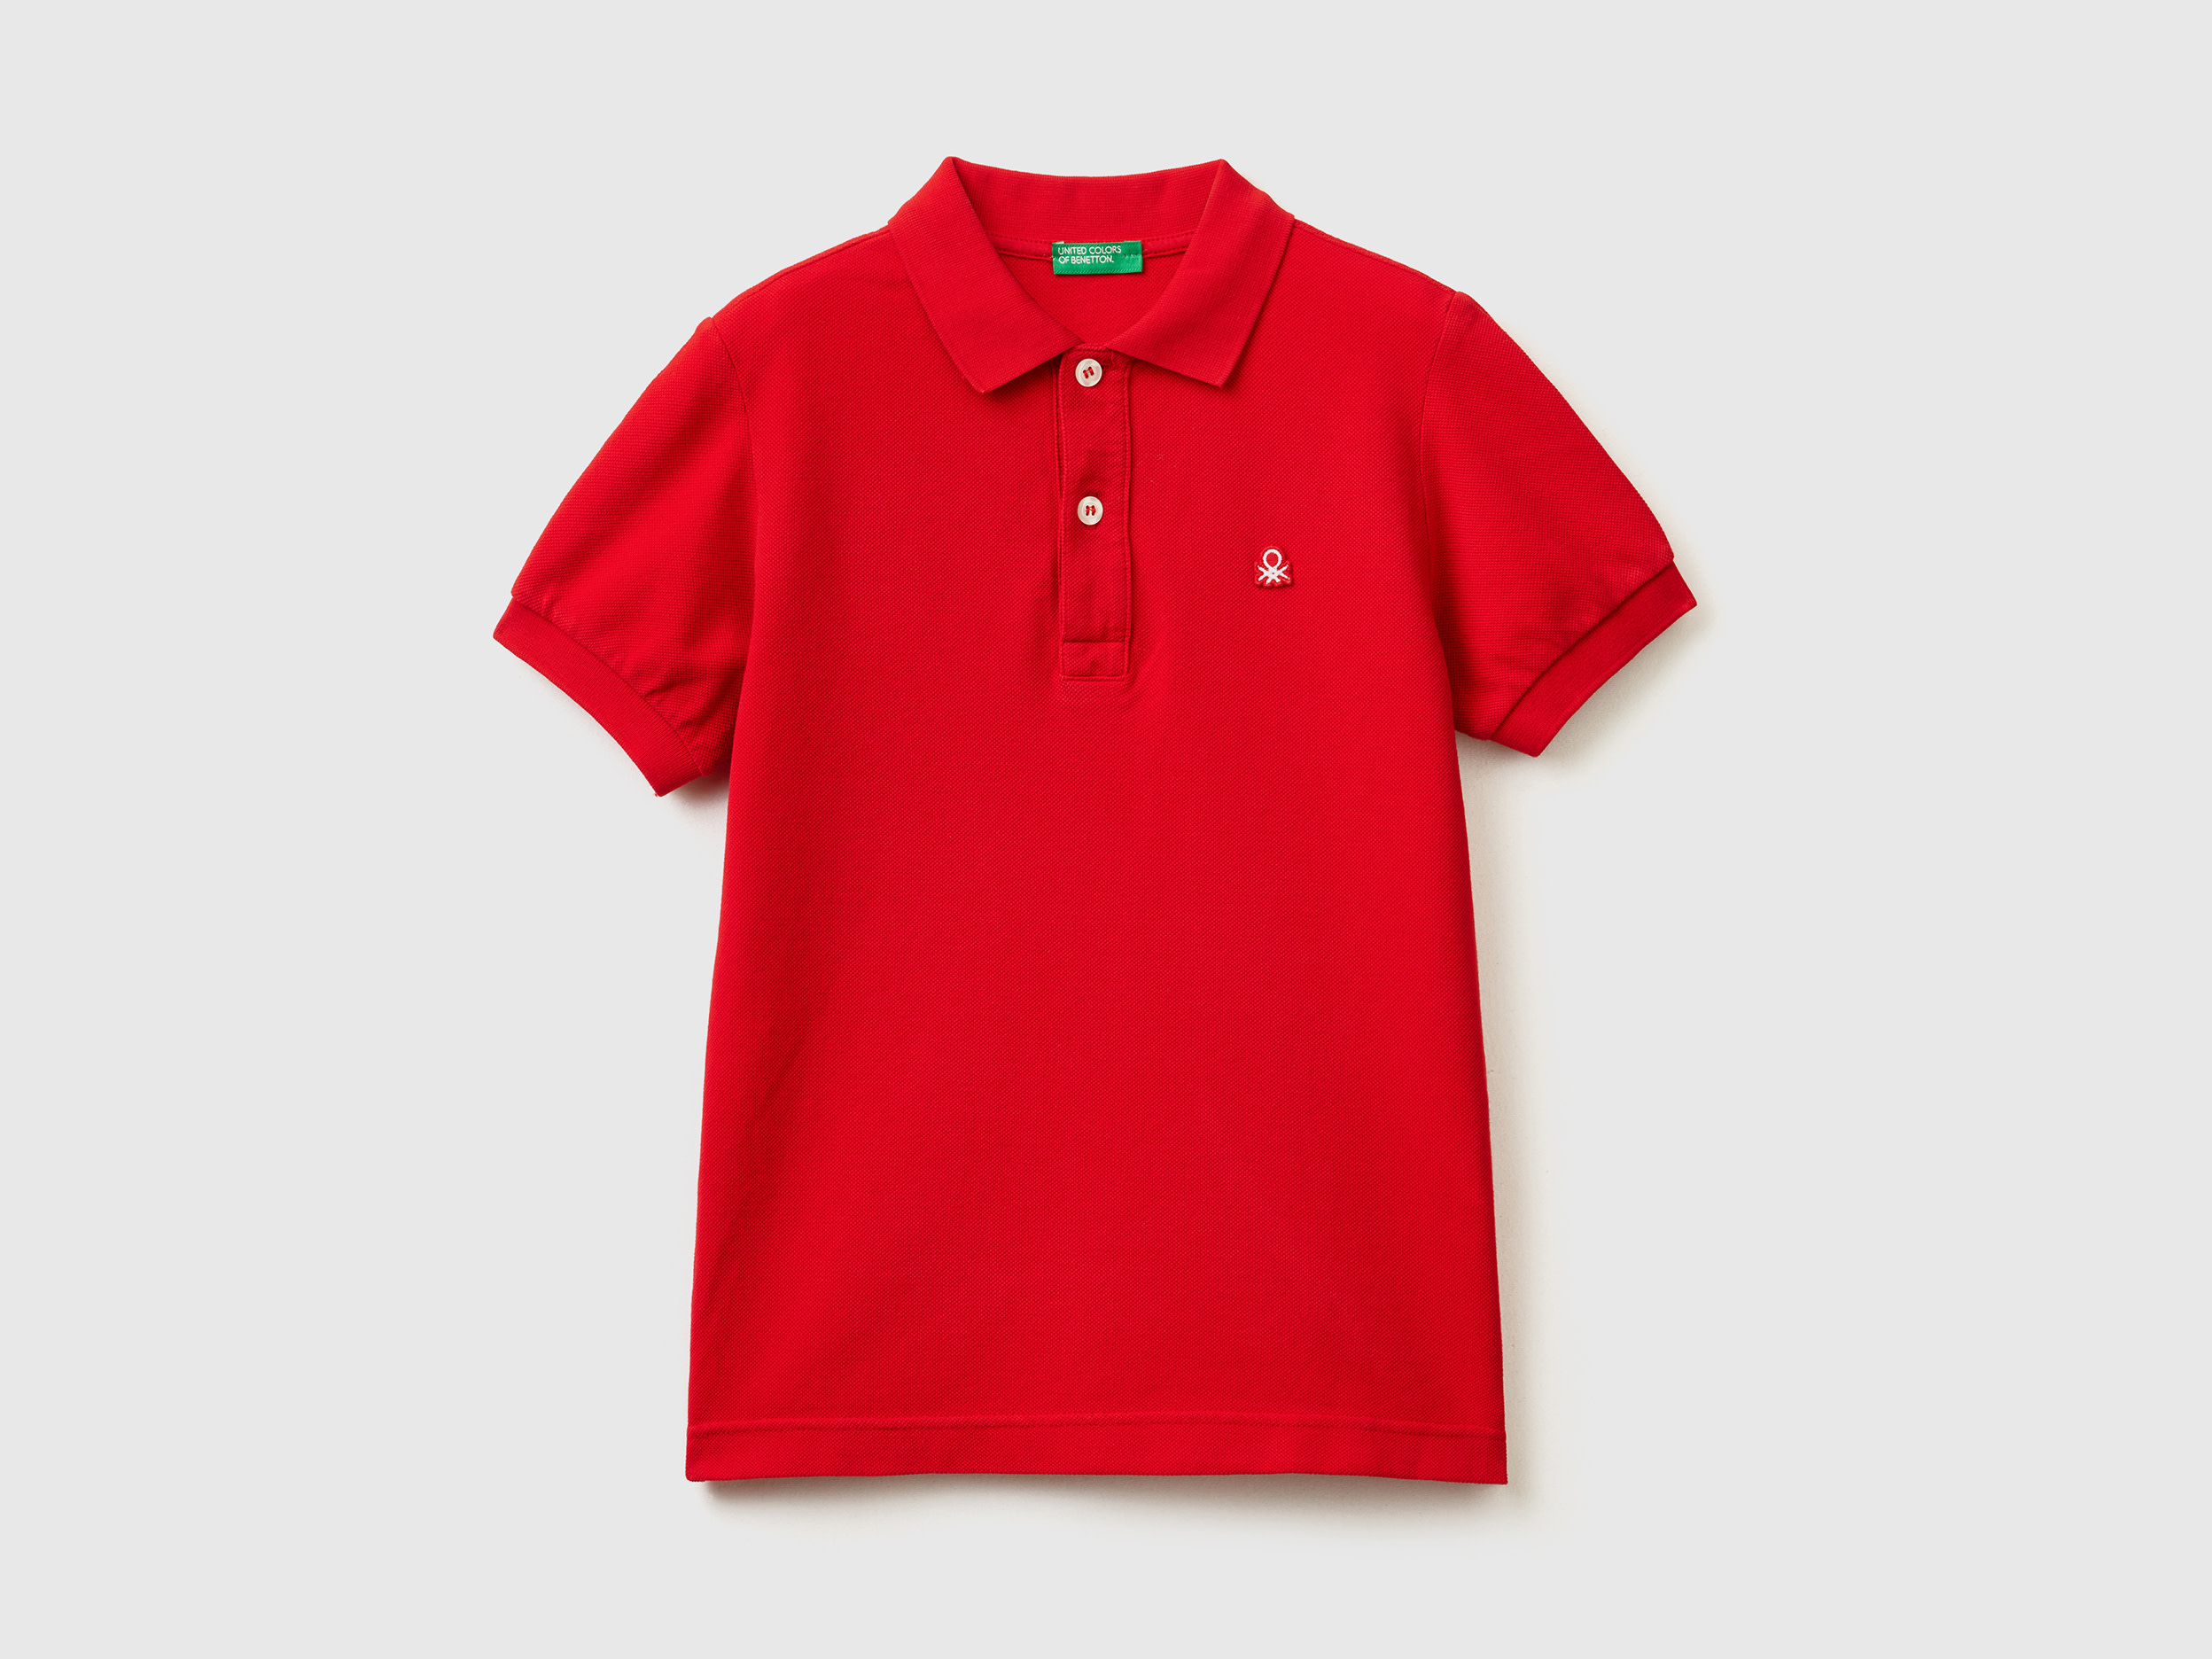 Image of Benetton, Slim Fit Polo In 100% Organic Cotton, size 3XL, Red, Kids